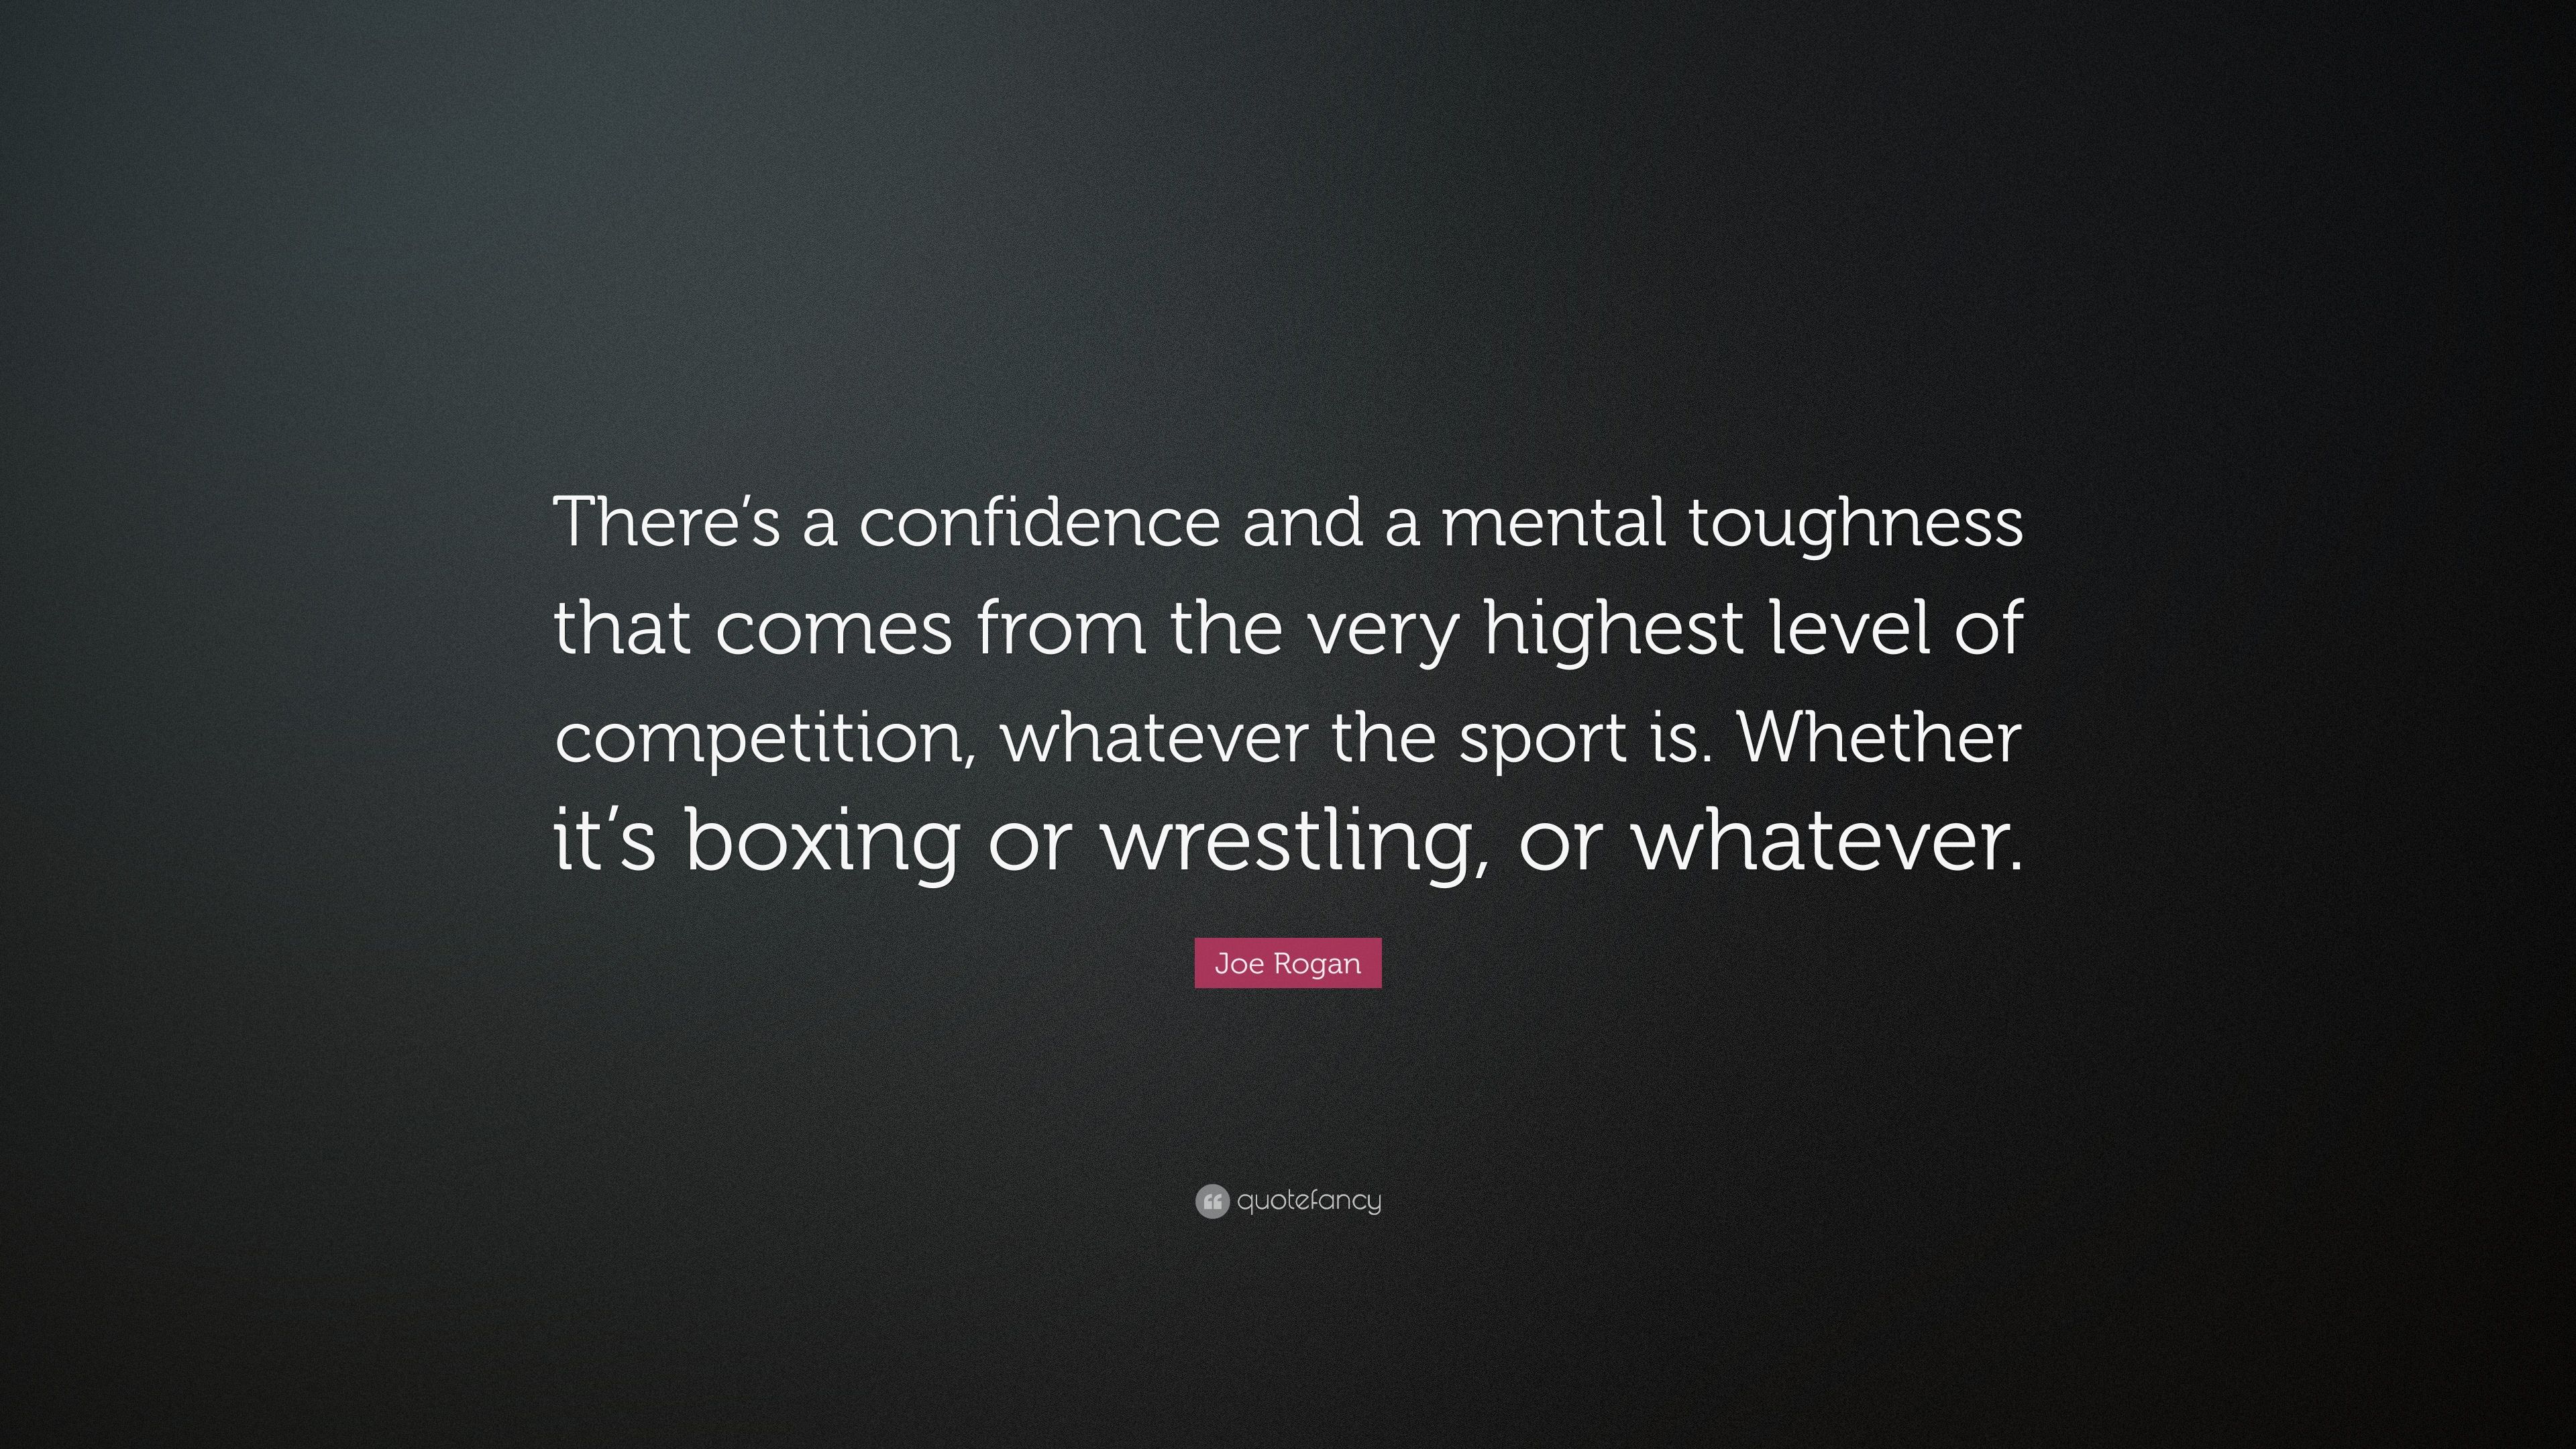 Joe Rogan Quote: “There's a confidence and a mental toughness that